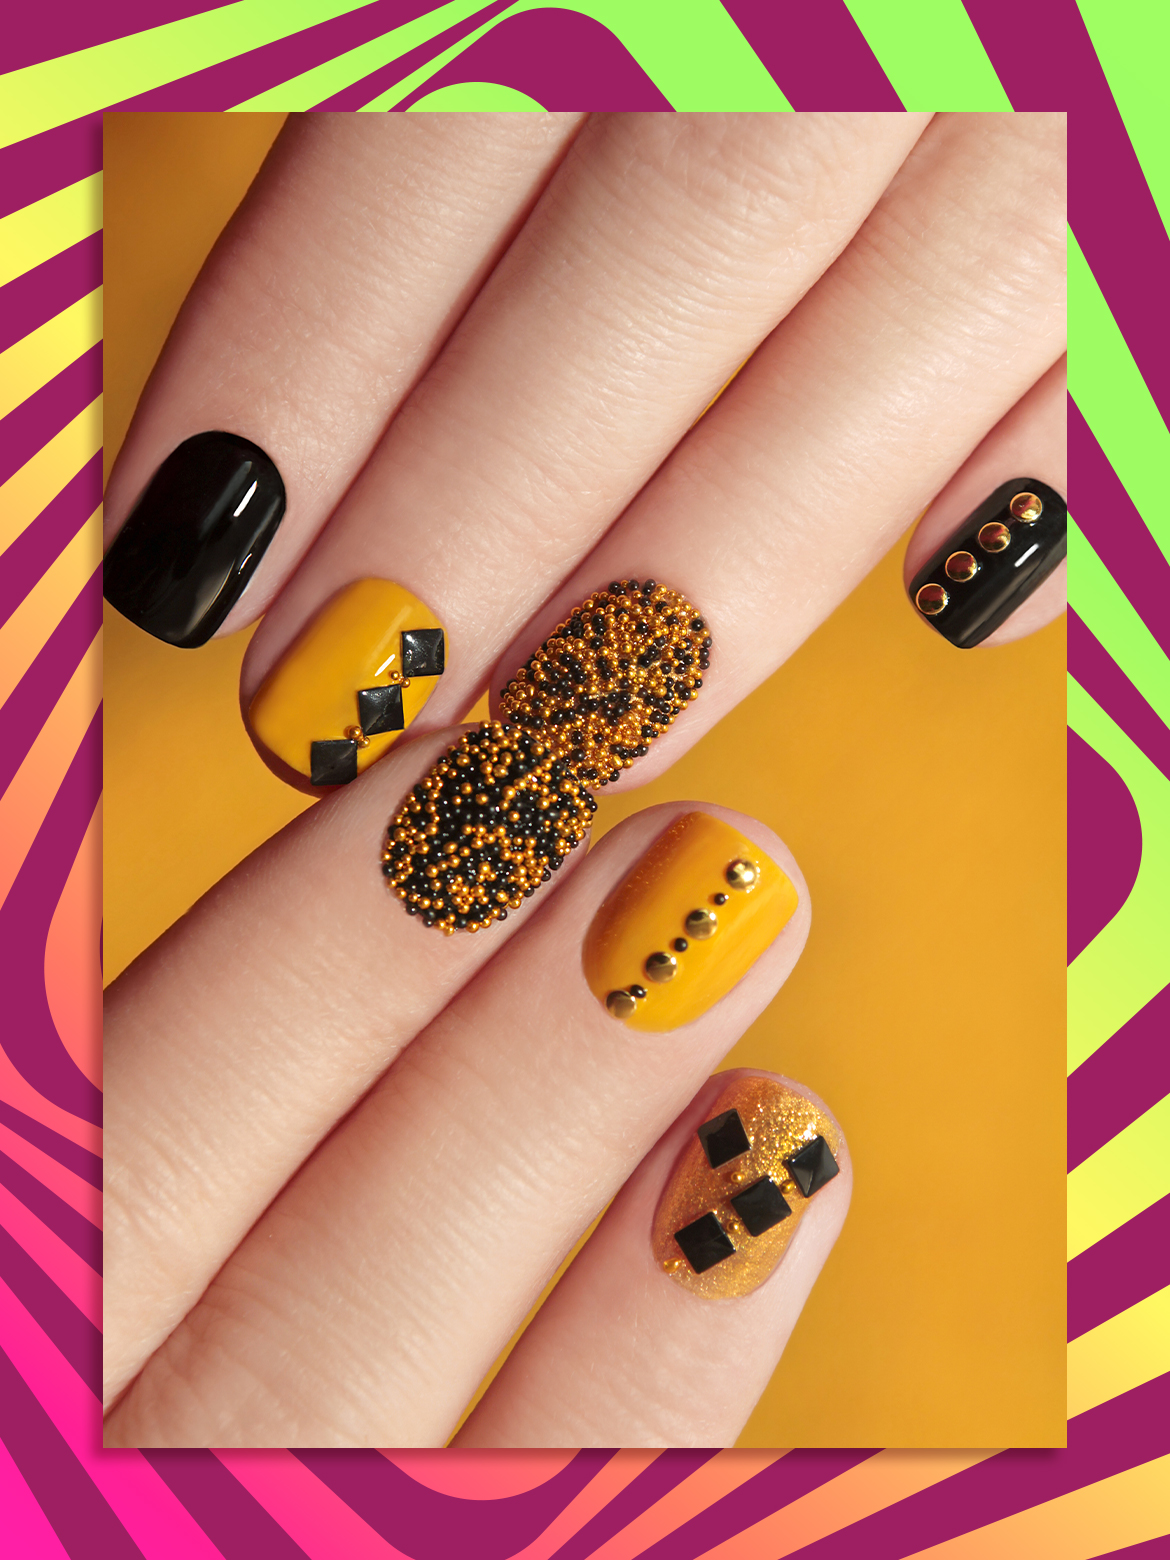 10 Easy Short Nail Design Inspo For Your Next Manicure - SUGAR ...